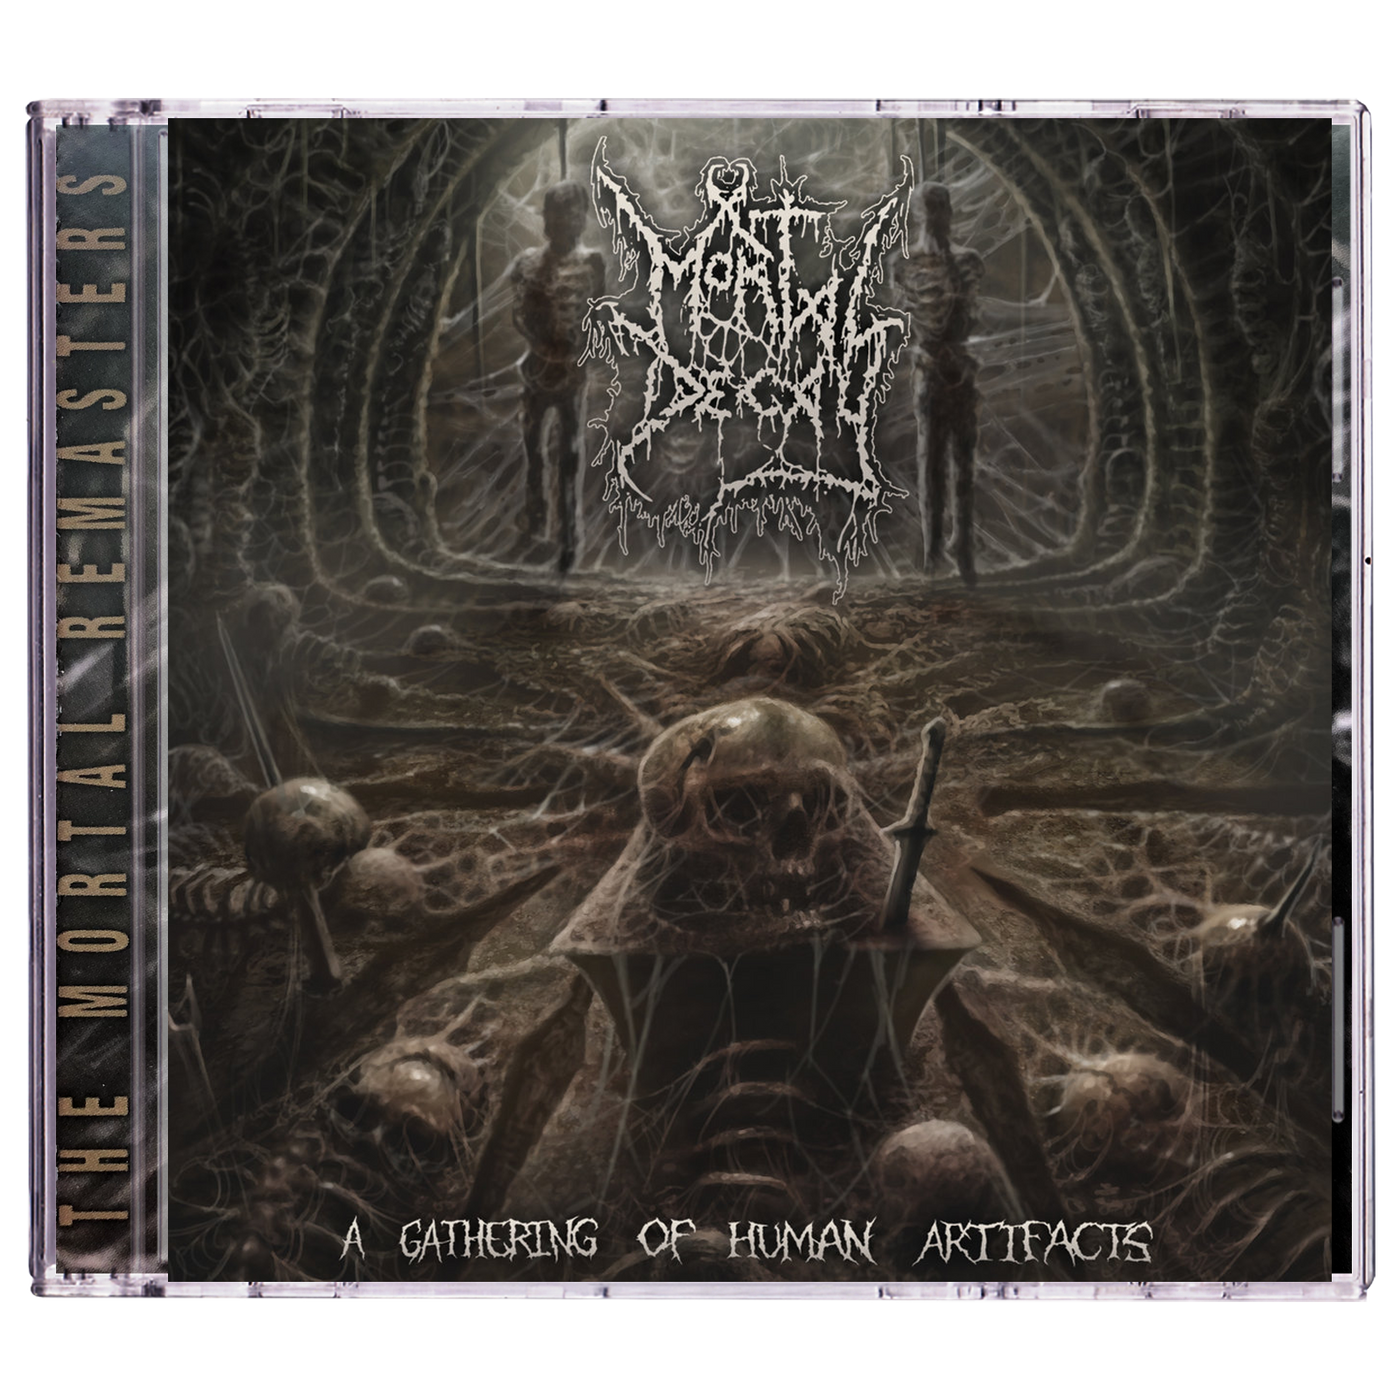 Mortal Decay 'A Gathering of Human Artifacts' CD